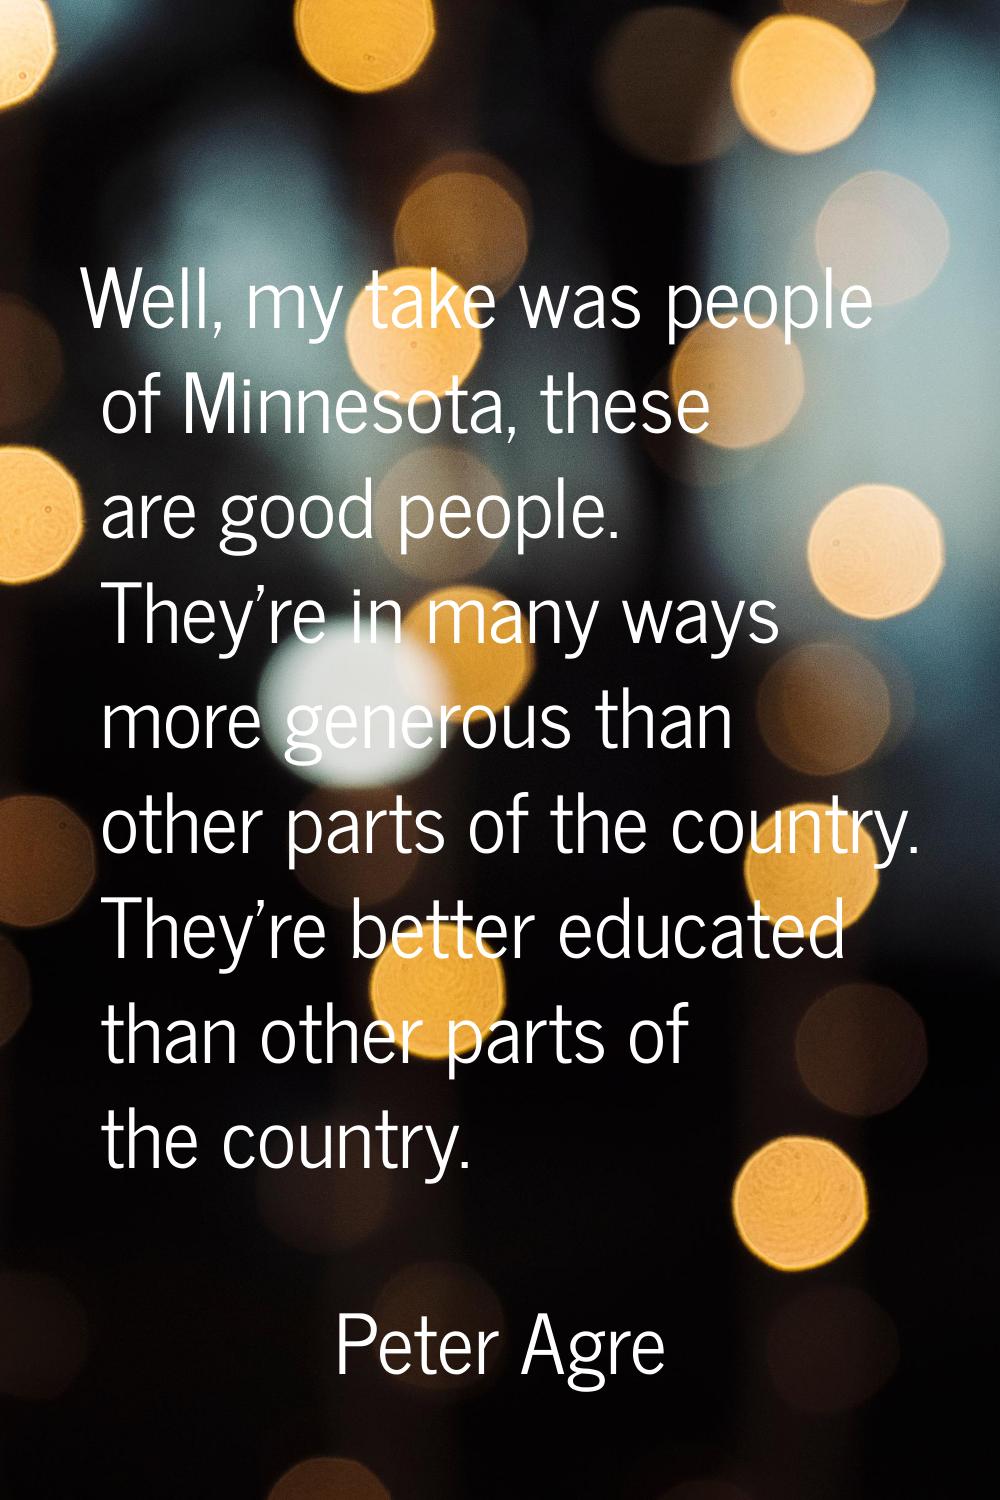 Well, my take was people of Minnesota, these are good people. They're in many ways more generous th